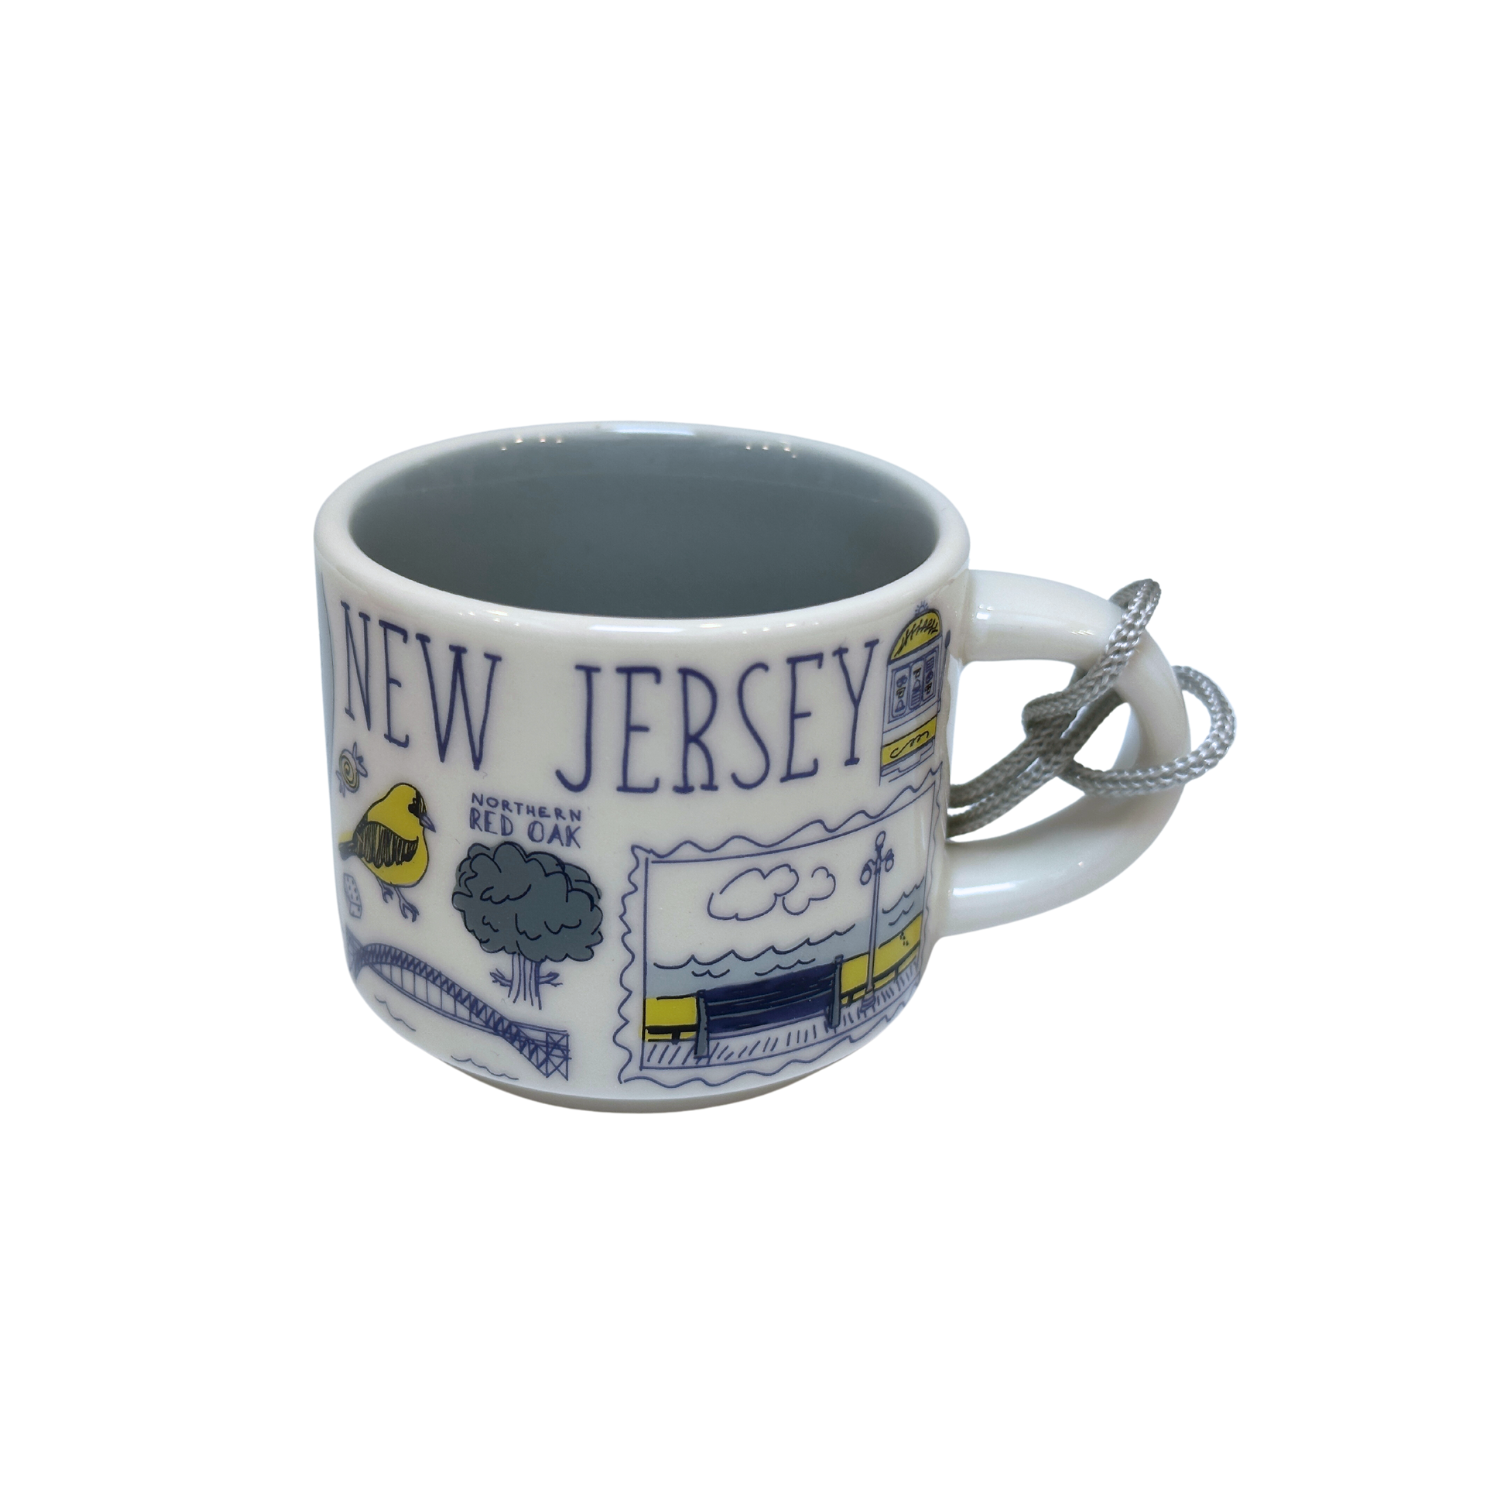 Starbucks Been There Series New Jersey Demitasse Ornament, 2 Oz